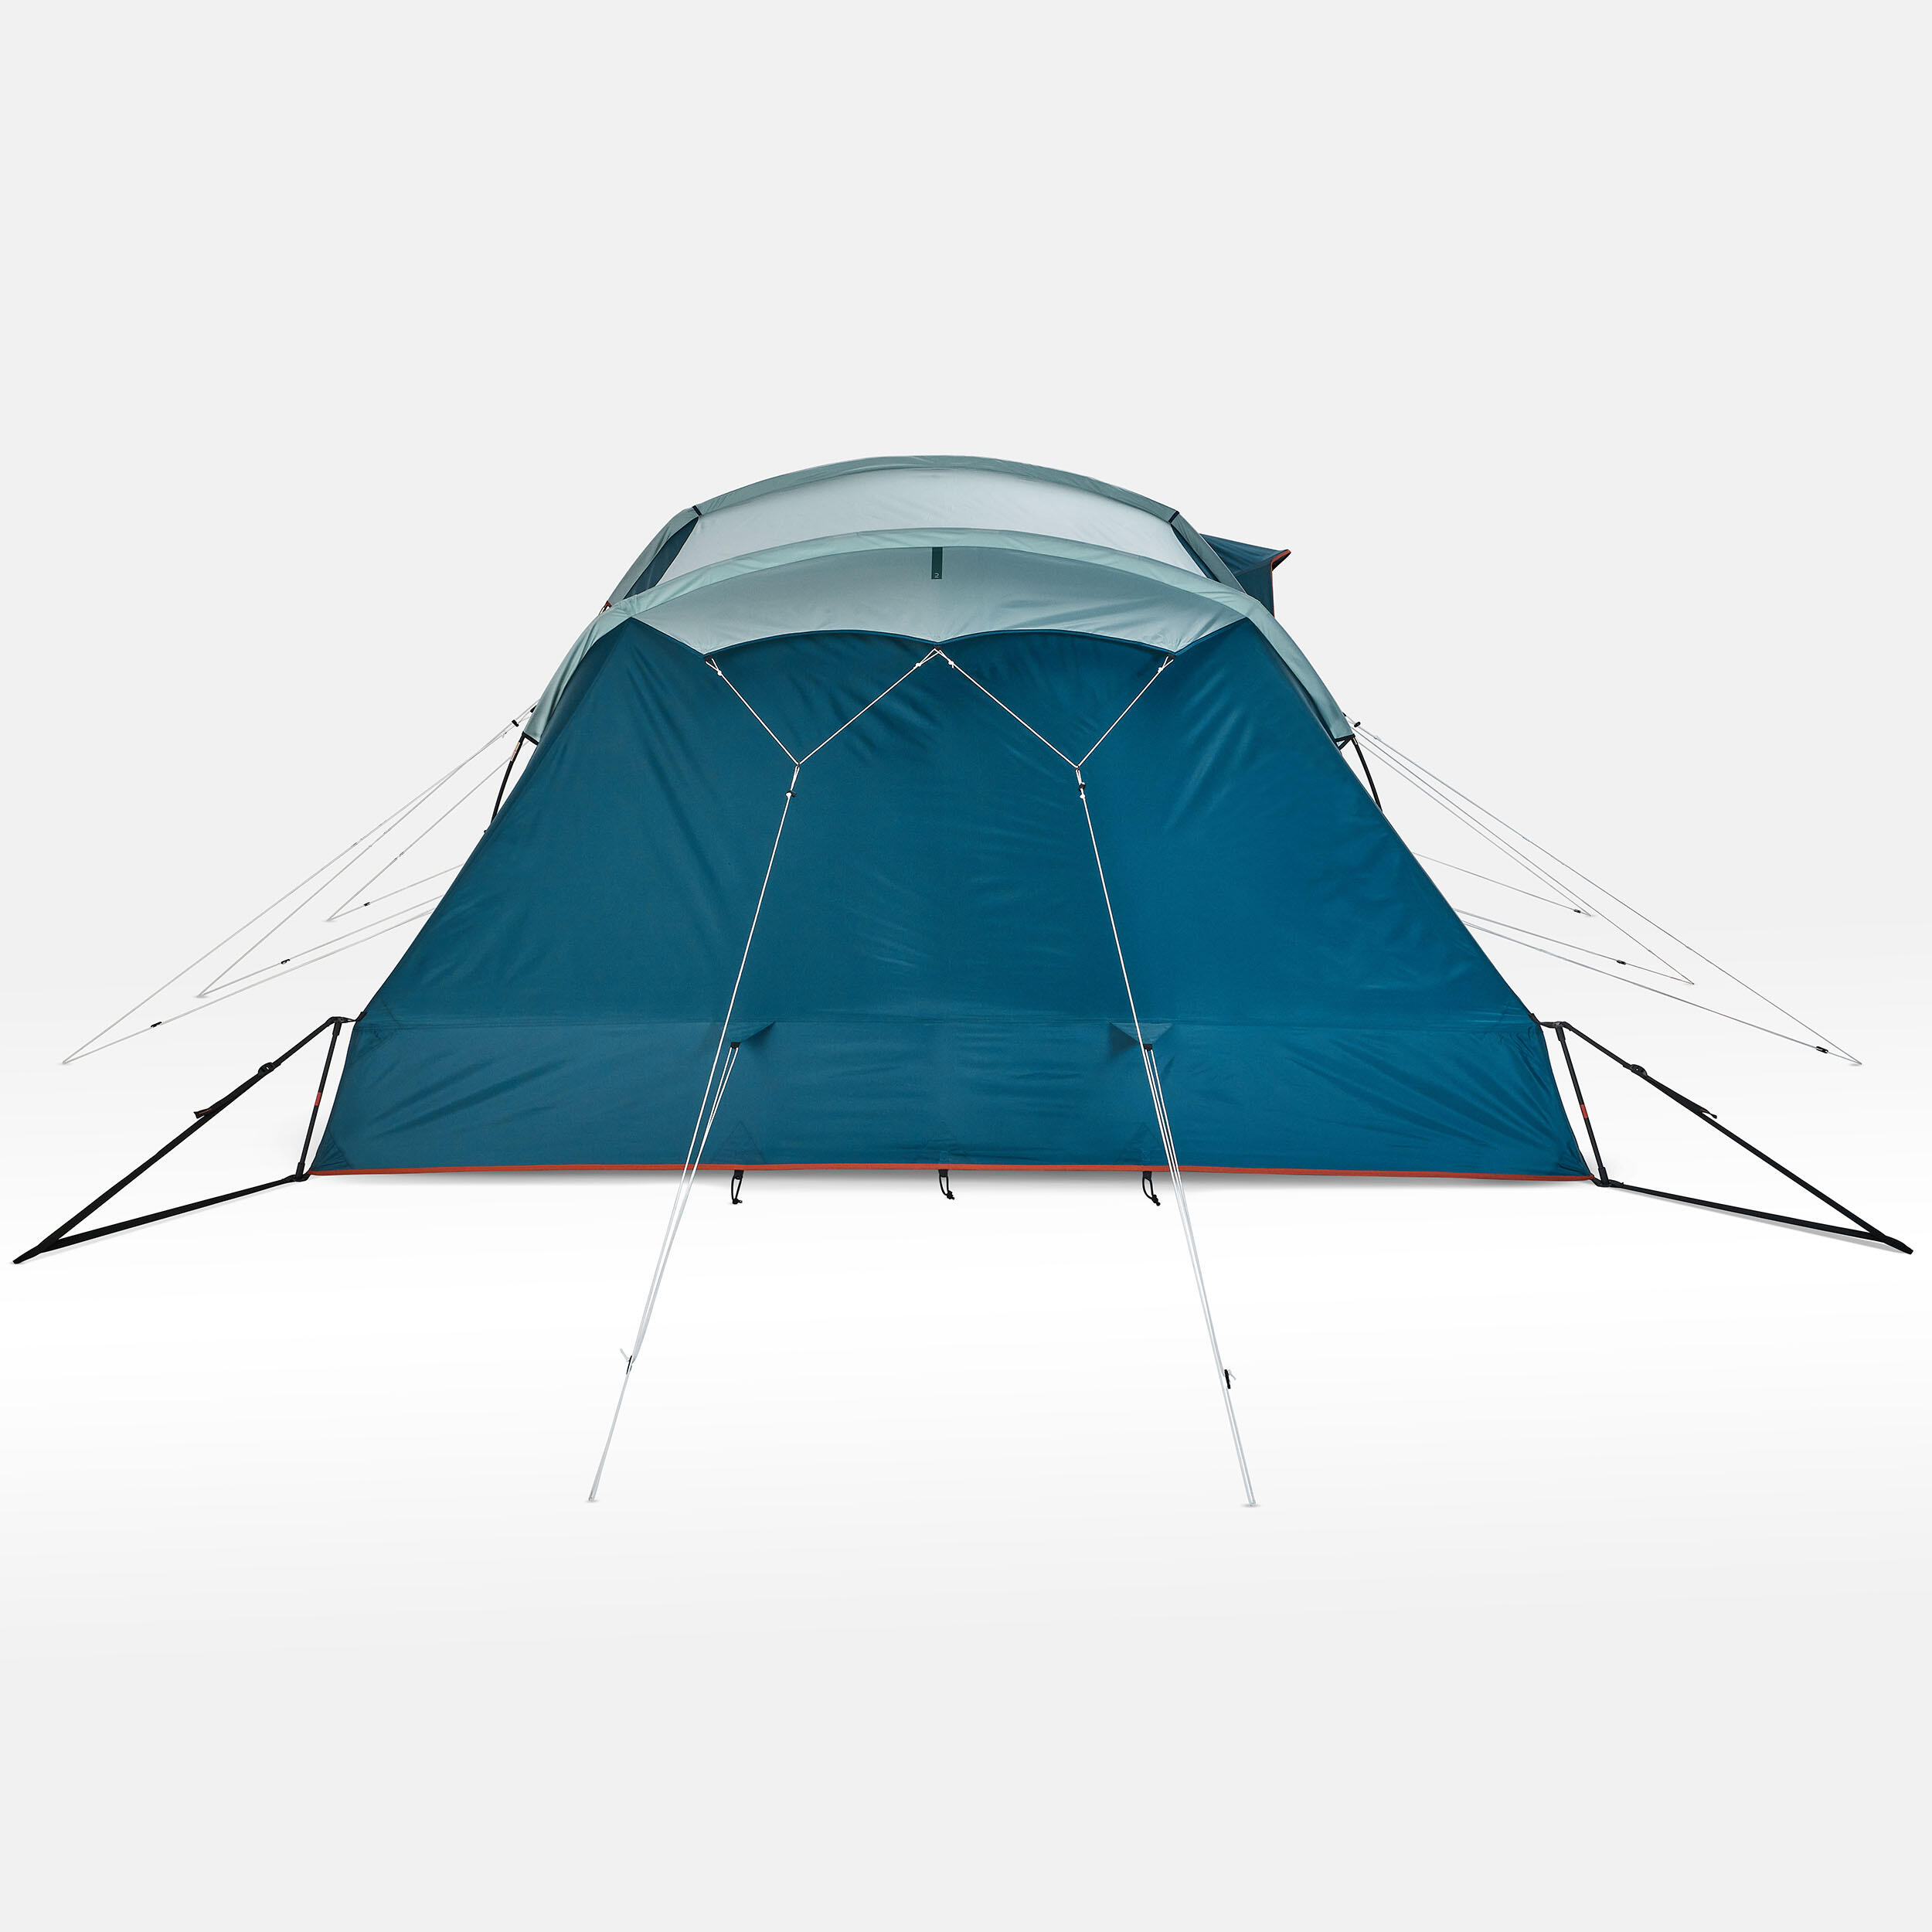 Camping tent with poles - Arpenaz 8.4 - 8 Person - 4 Bedrooms 13/31